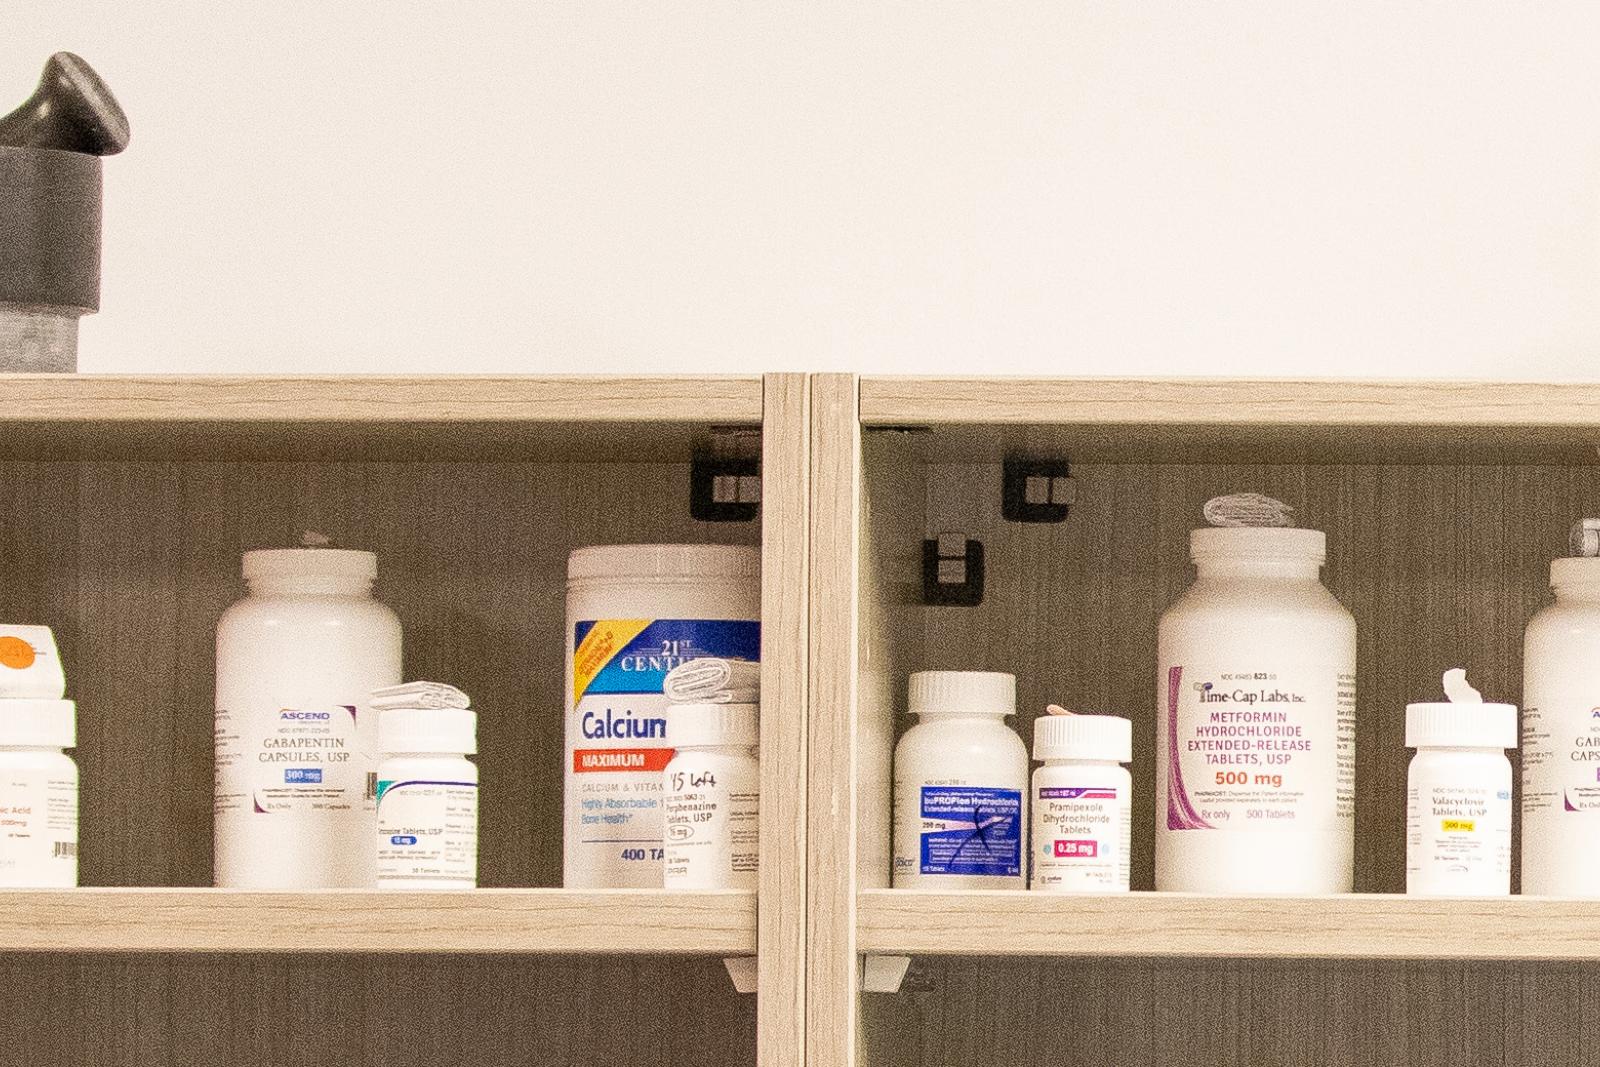 Pharmacy shelves with pill bottles and "The Ohio State University" mortar and pestles